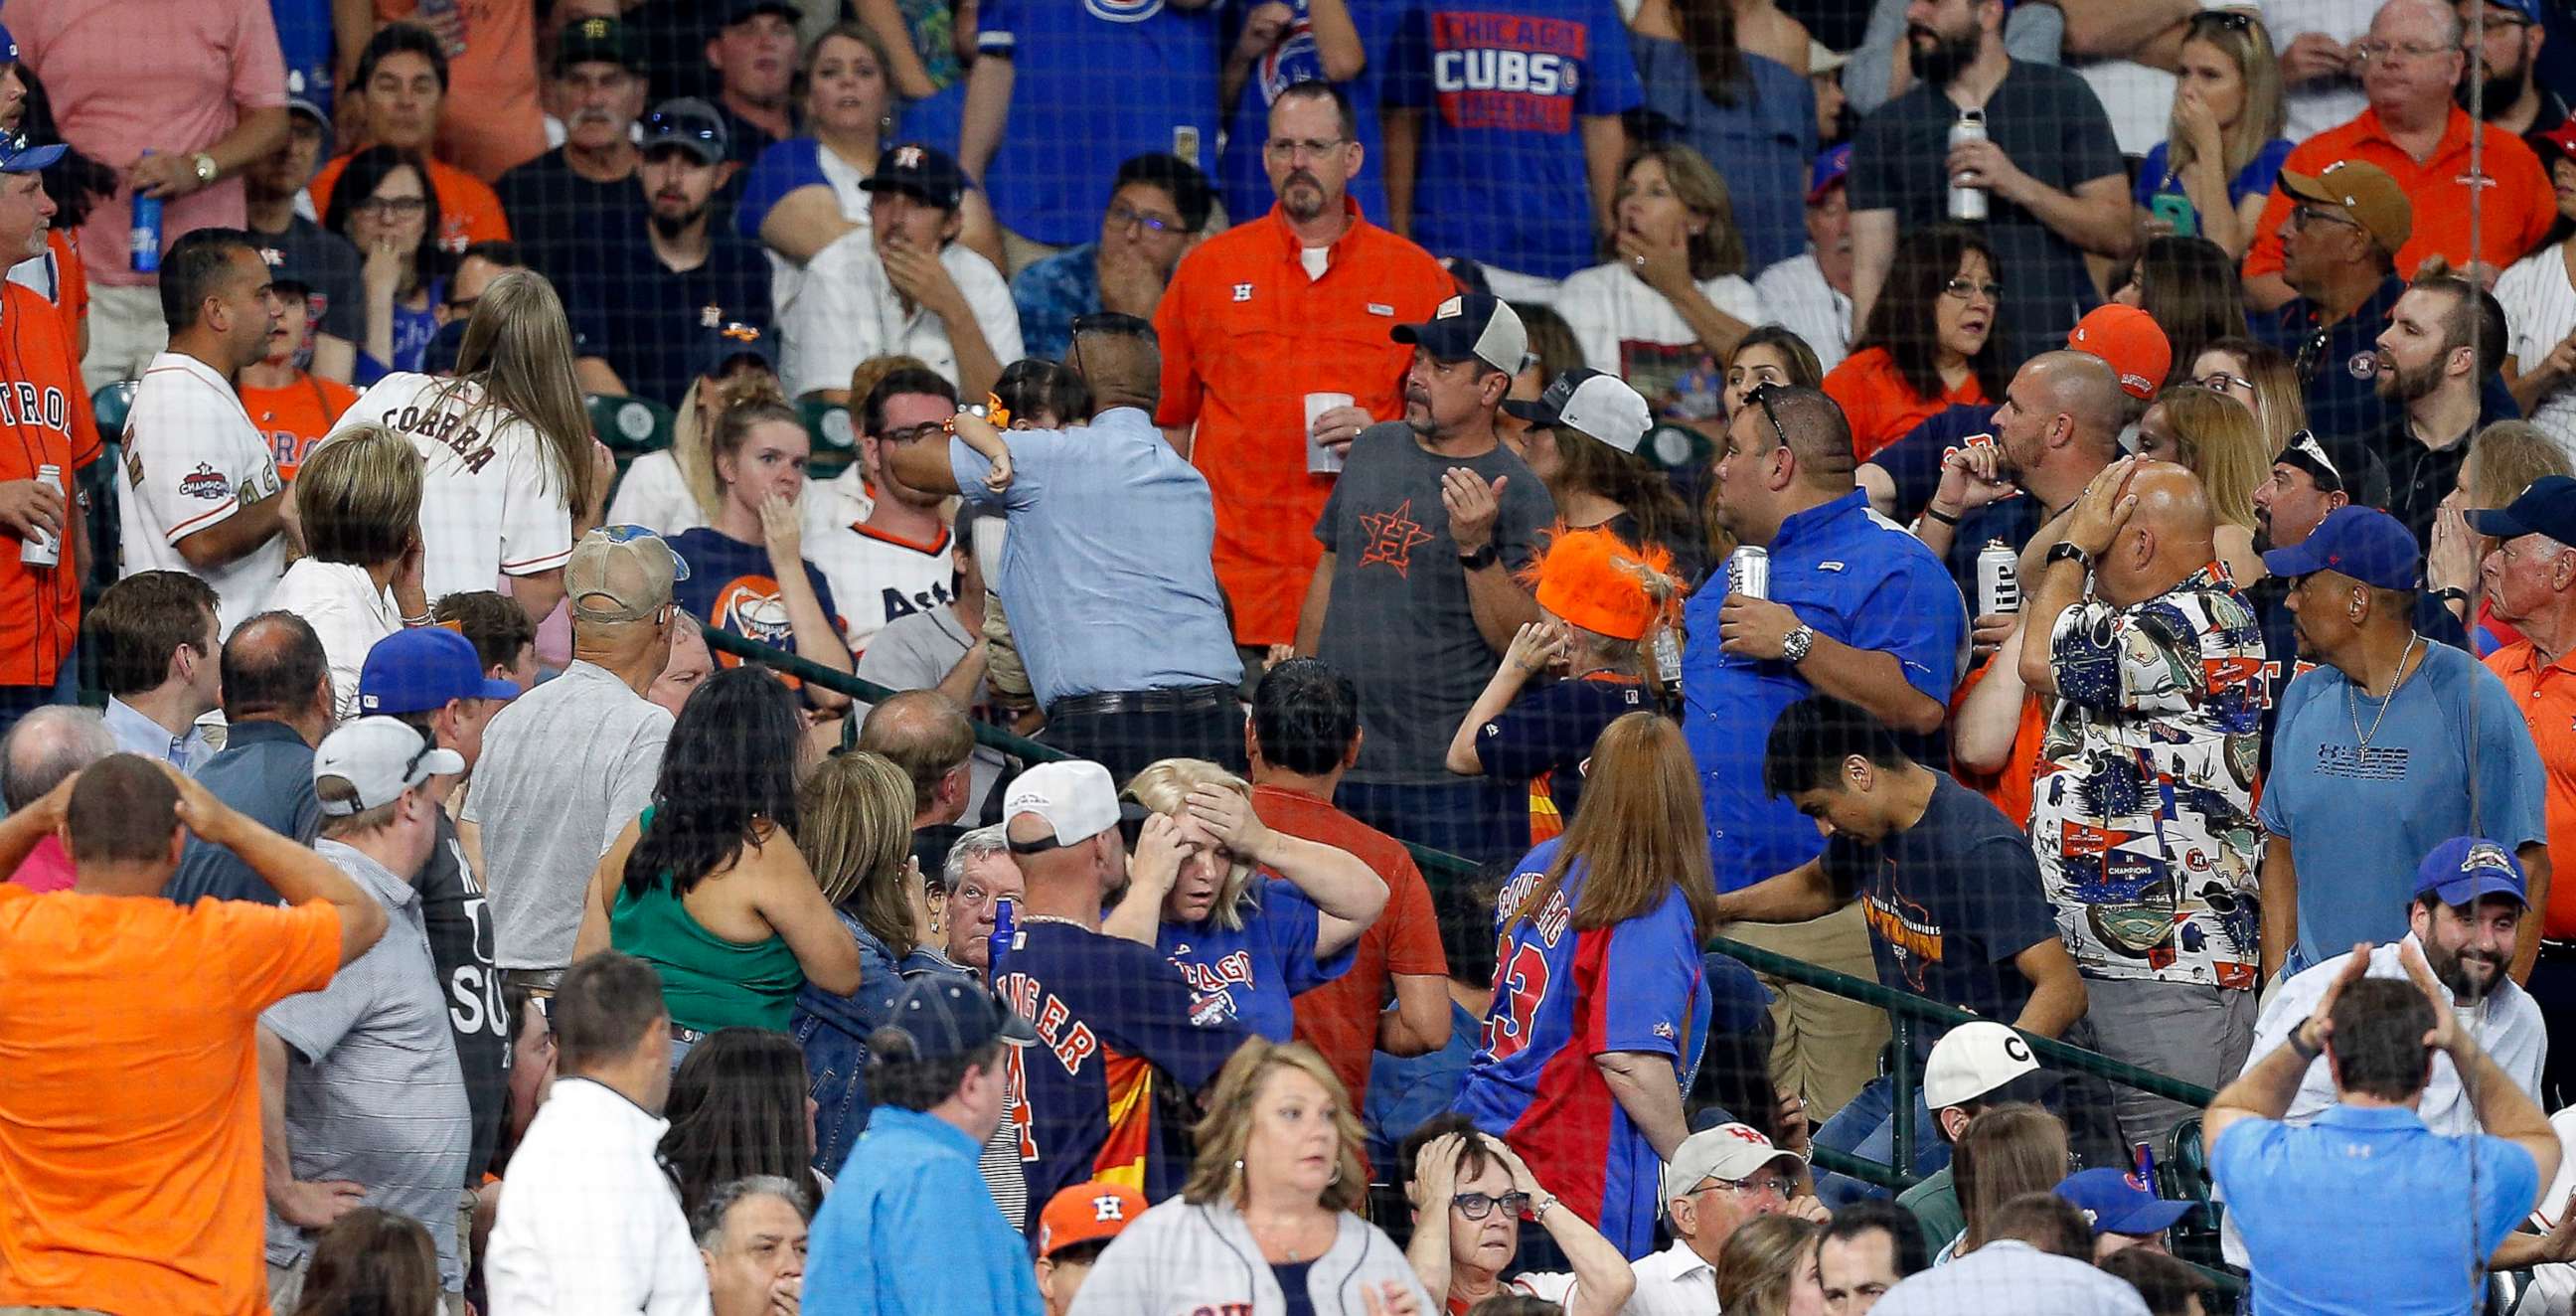 Girl hit by foul ball at Houston Astros-Cubs game had skull fracture